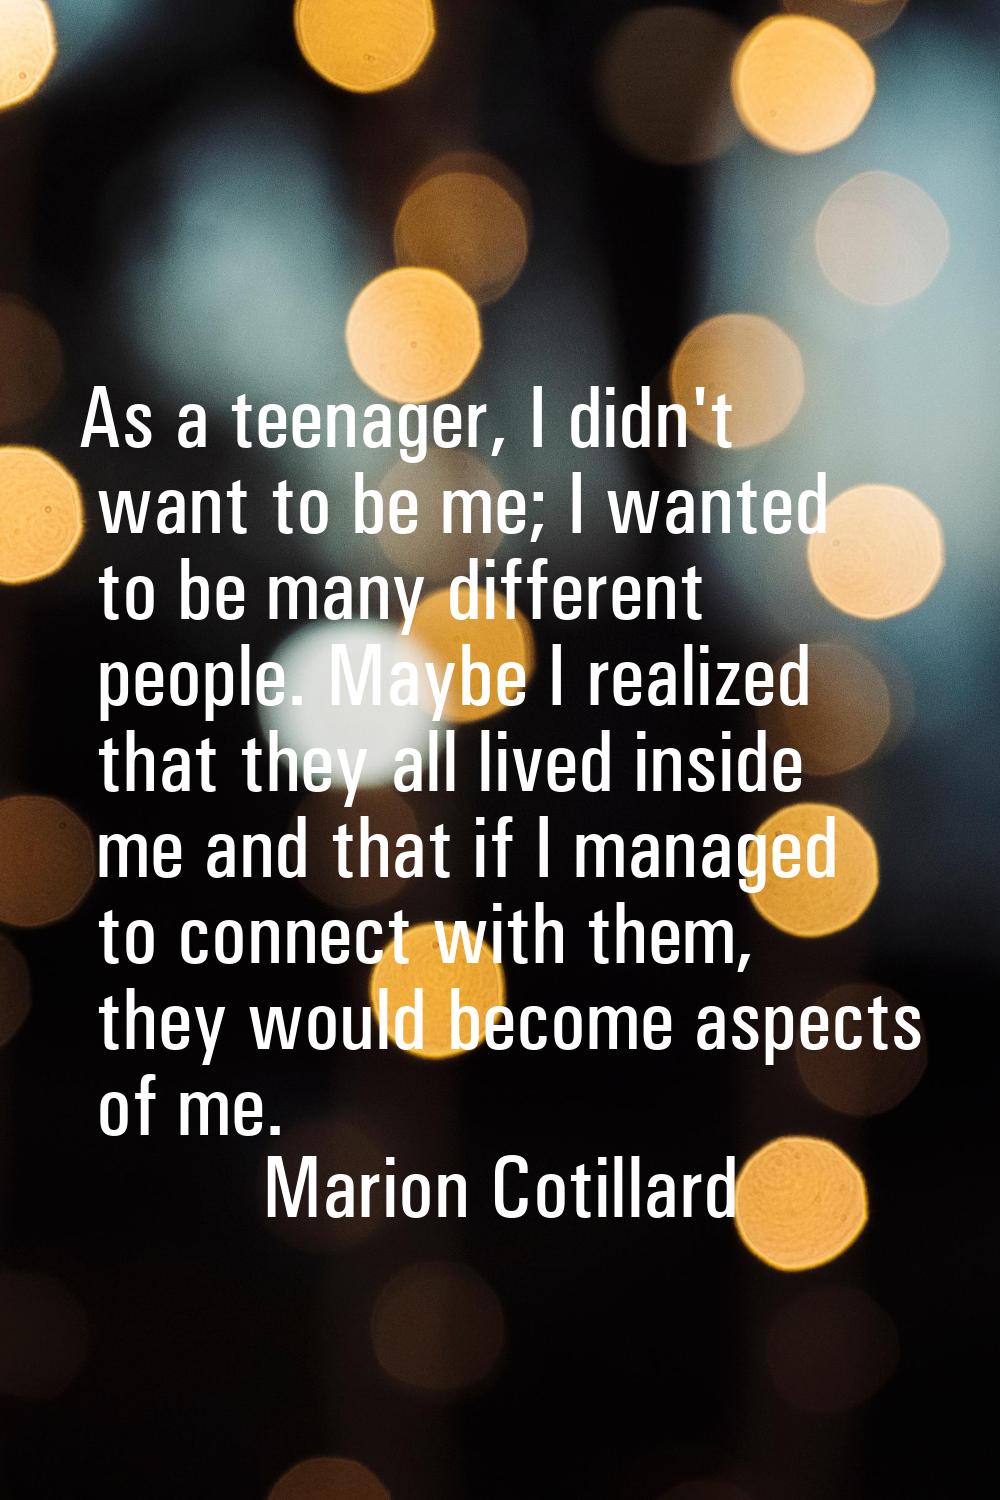 As a teenager, I didn't want to be me; I wanted to be many different people. Maybe I realized that 